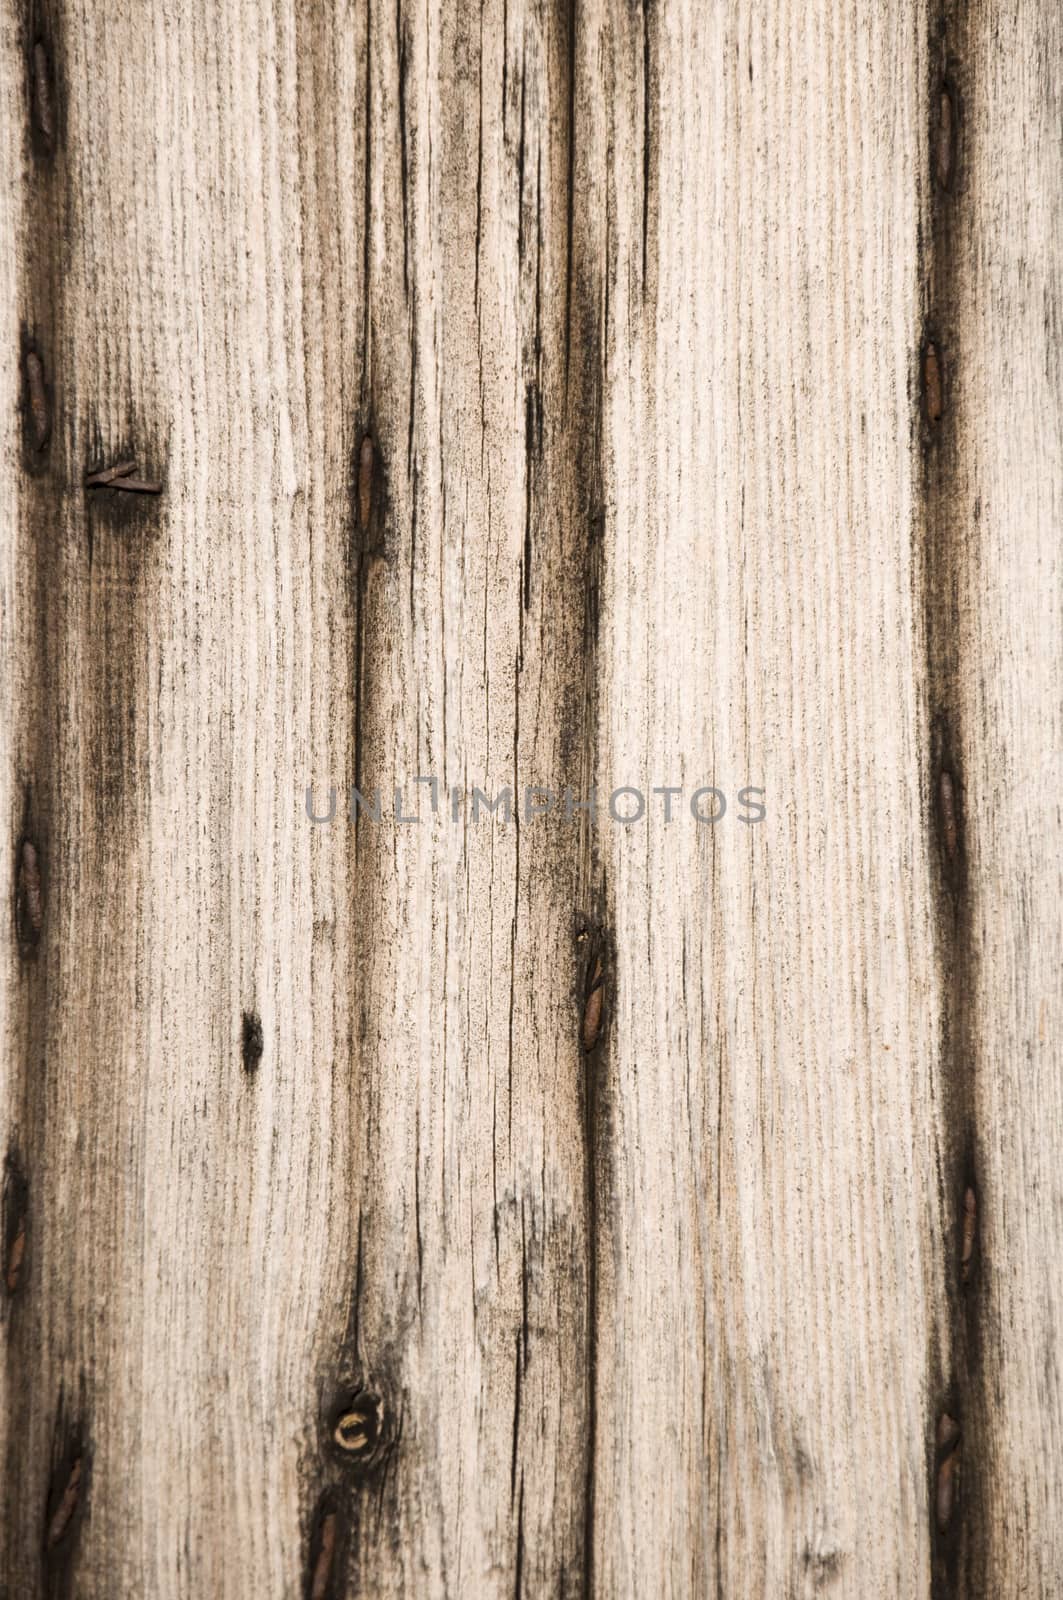 The brown wood texture with natural patterns 